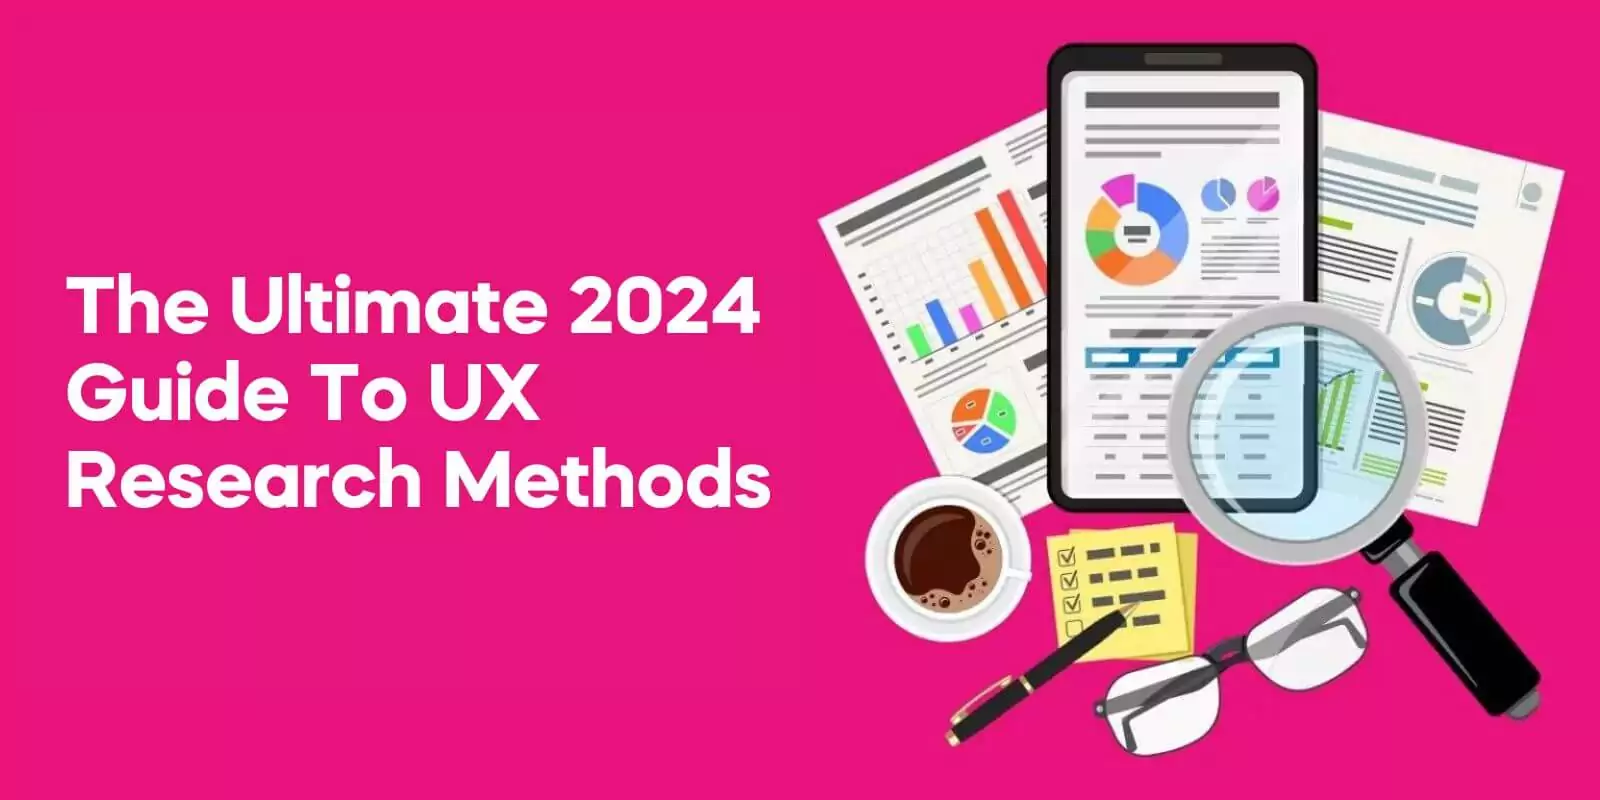 The Ultimate 2024 Guide to UX Research Methods